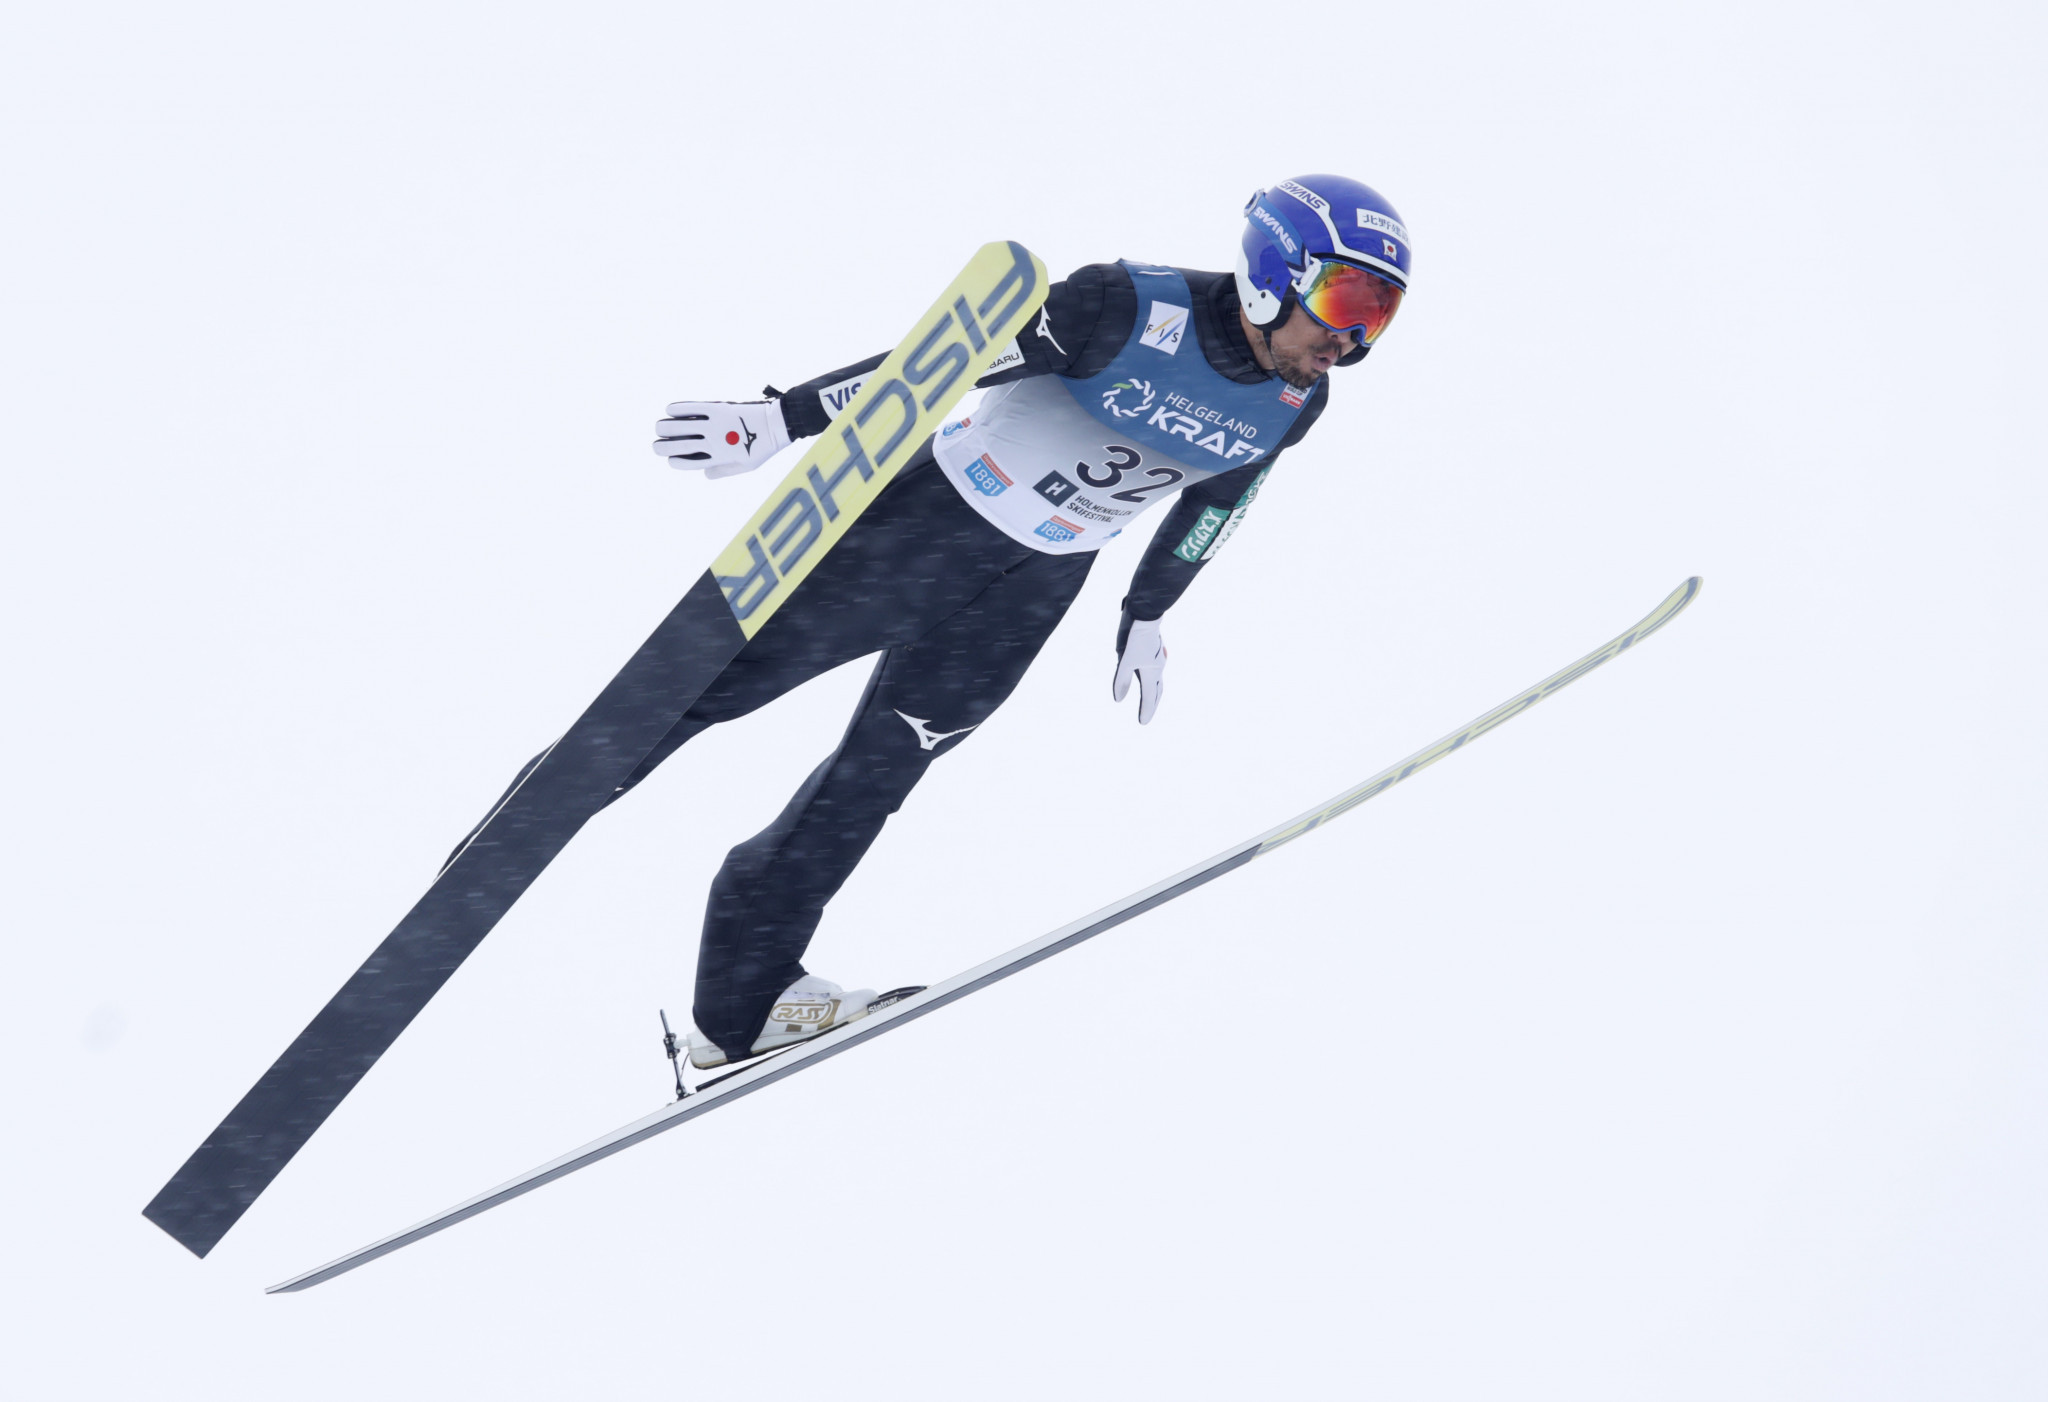 Women's Nordic Combined given boost in Olympic bid as creation of World